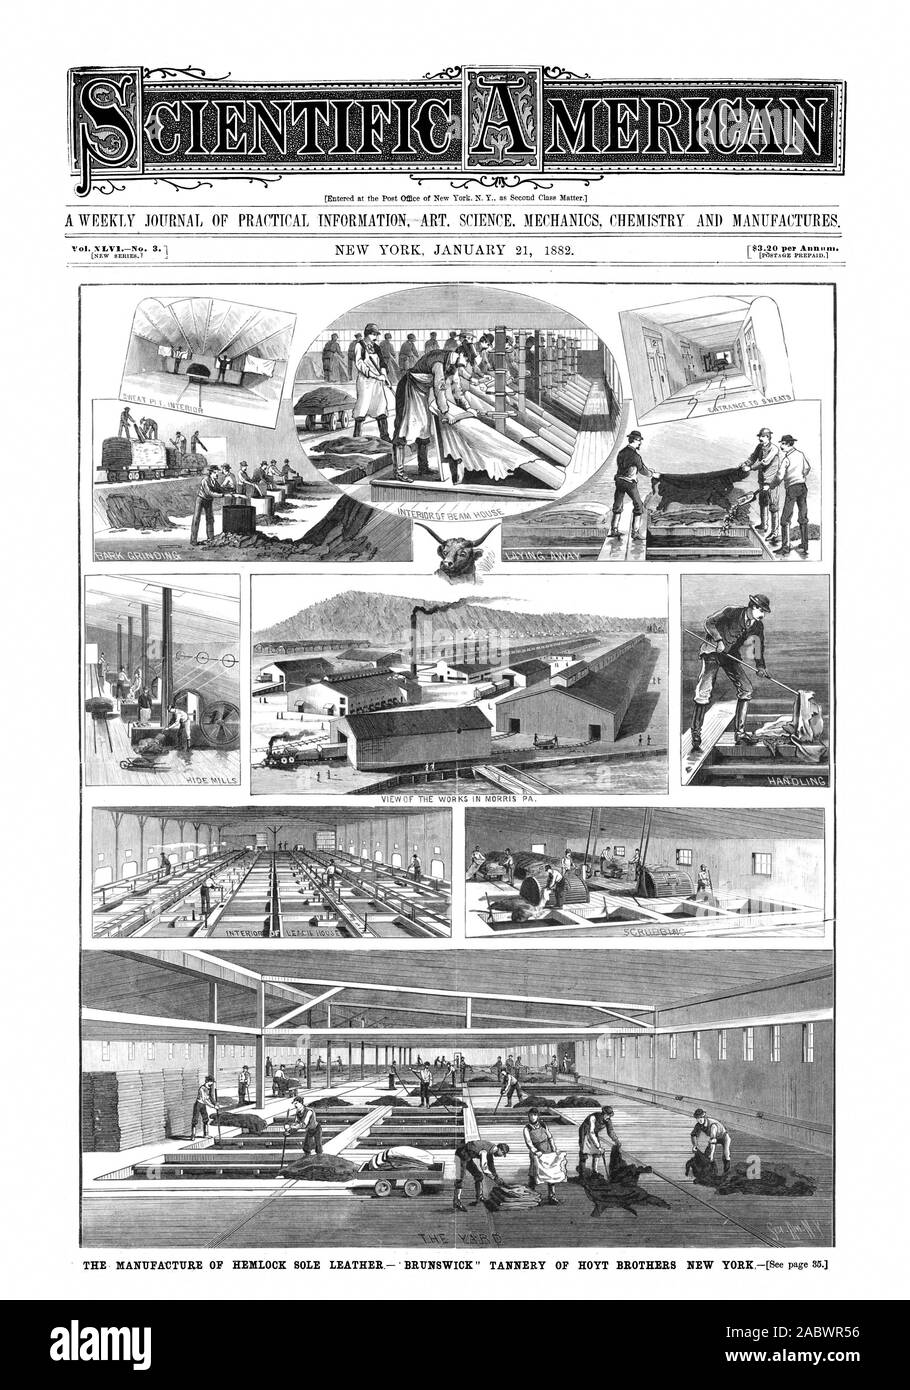 THE IVIANUFAVTURE OF HEMLOCK SOLE LEATHER  BRUNSWICK' TANNERY OF HOYT BROTHERS NEW YORK, scientific american, 1882-01-21 Stock Photo